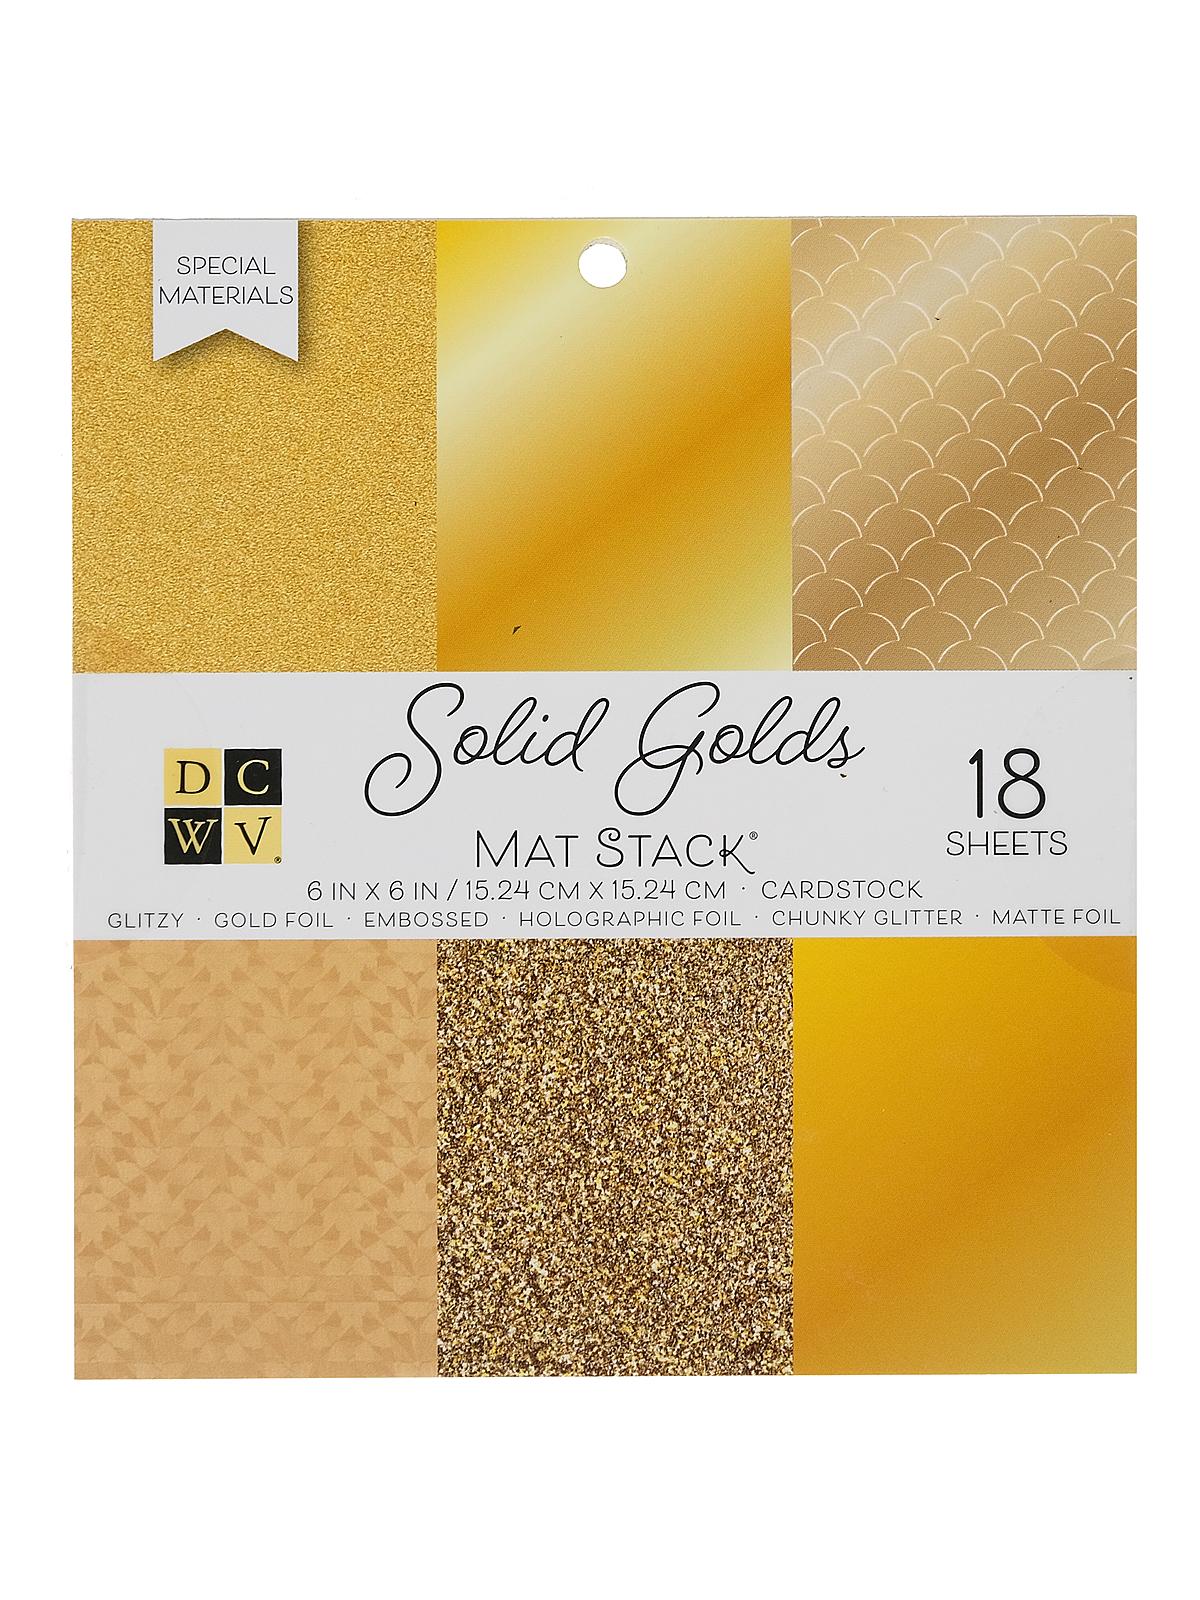 Cardstock Stacks 6 In. X 6 In. Solid Golds 18 Sheets